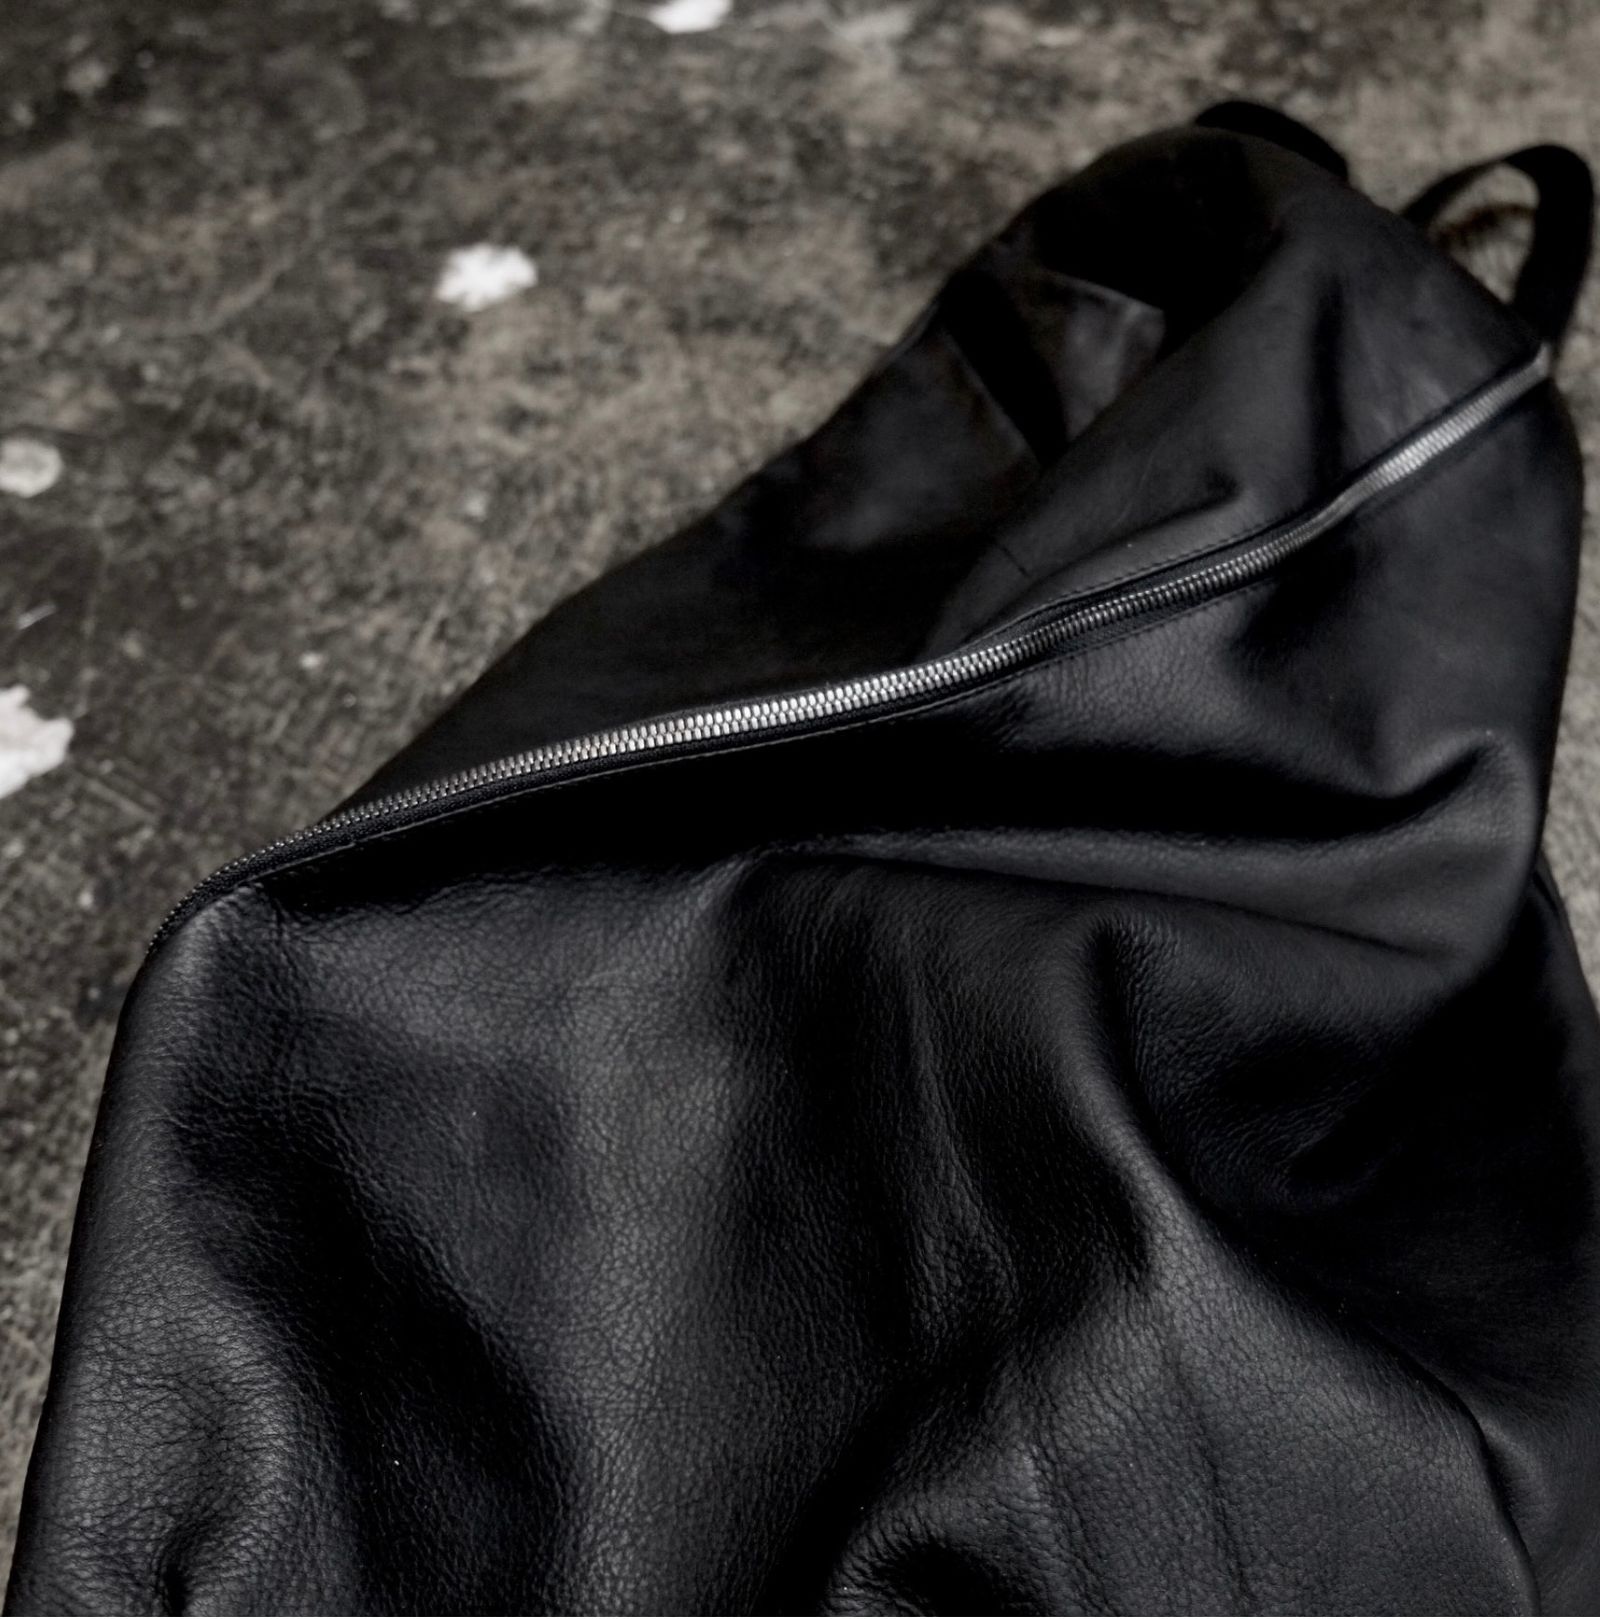 T.A.S - 【お取り寄せ注文可能】Distorted 2Way Bag | ACRMTSM ONLINE